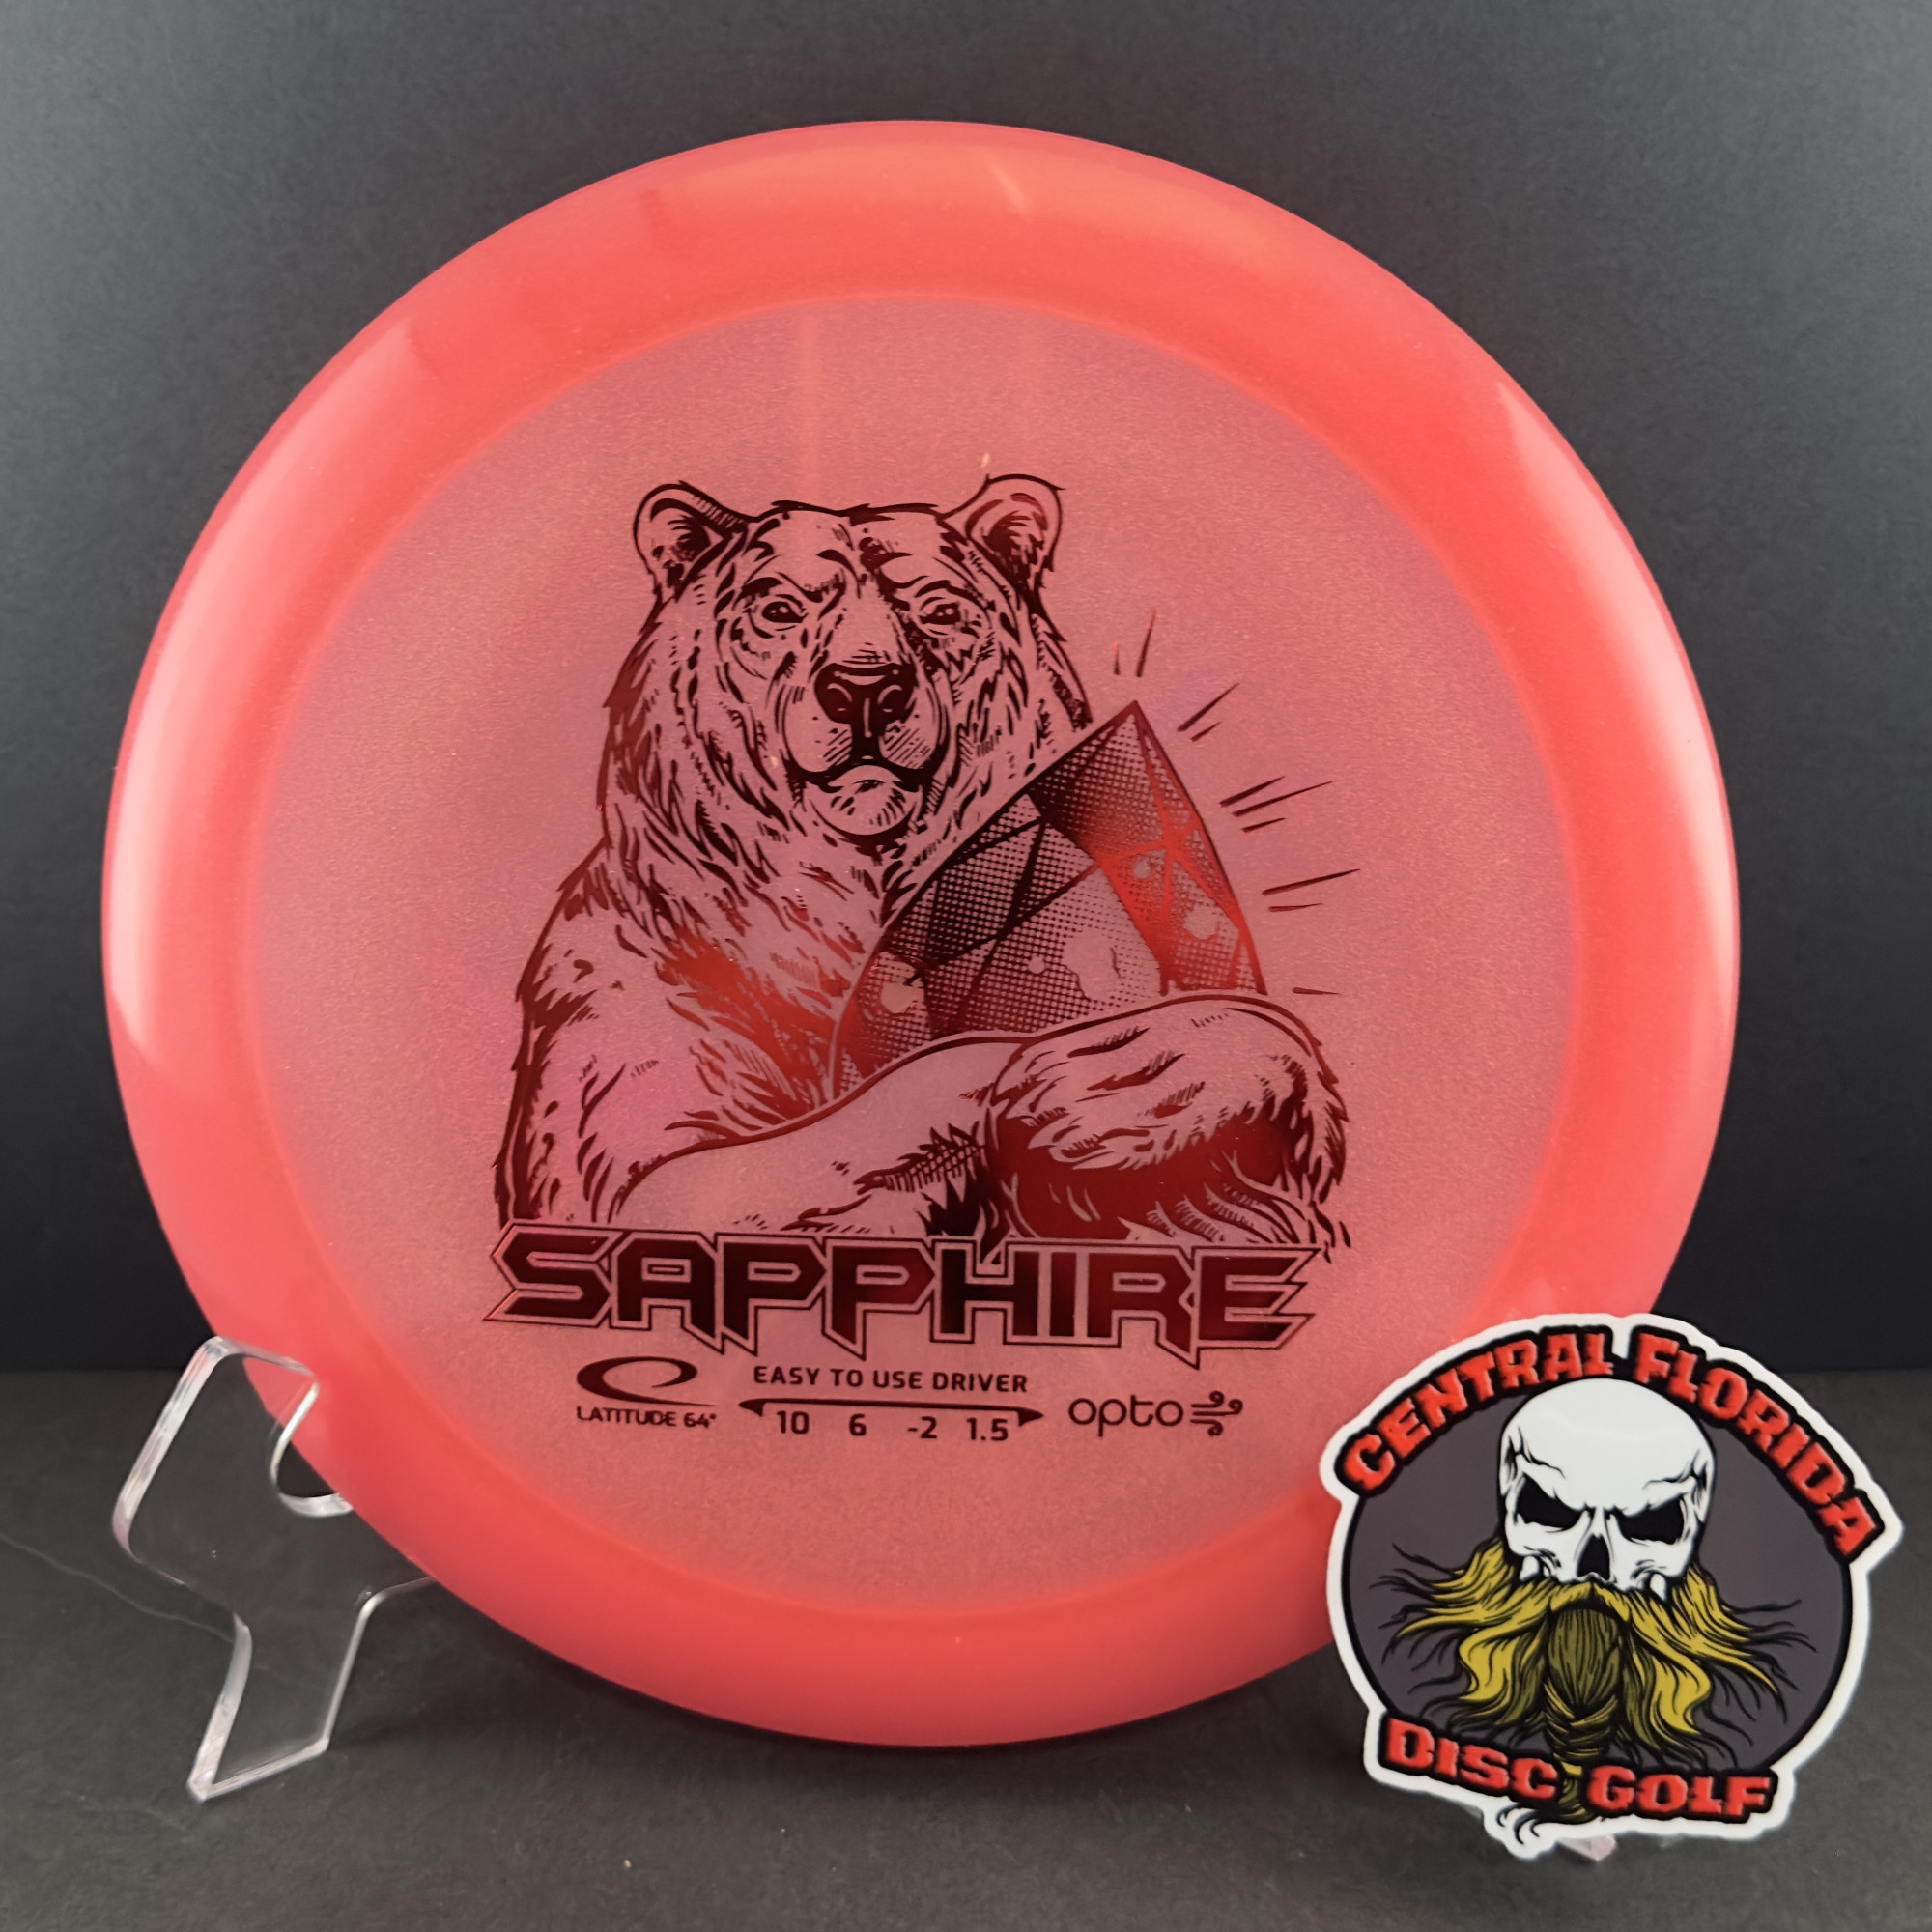 products LATITUDE 64 OPTO AIR SAPPHIRE 159G PINK/RED METALLIC